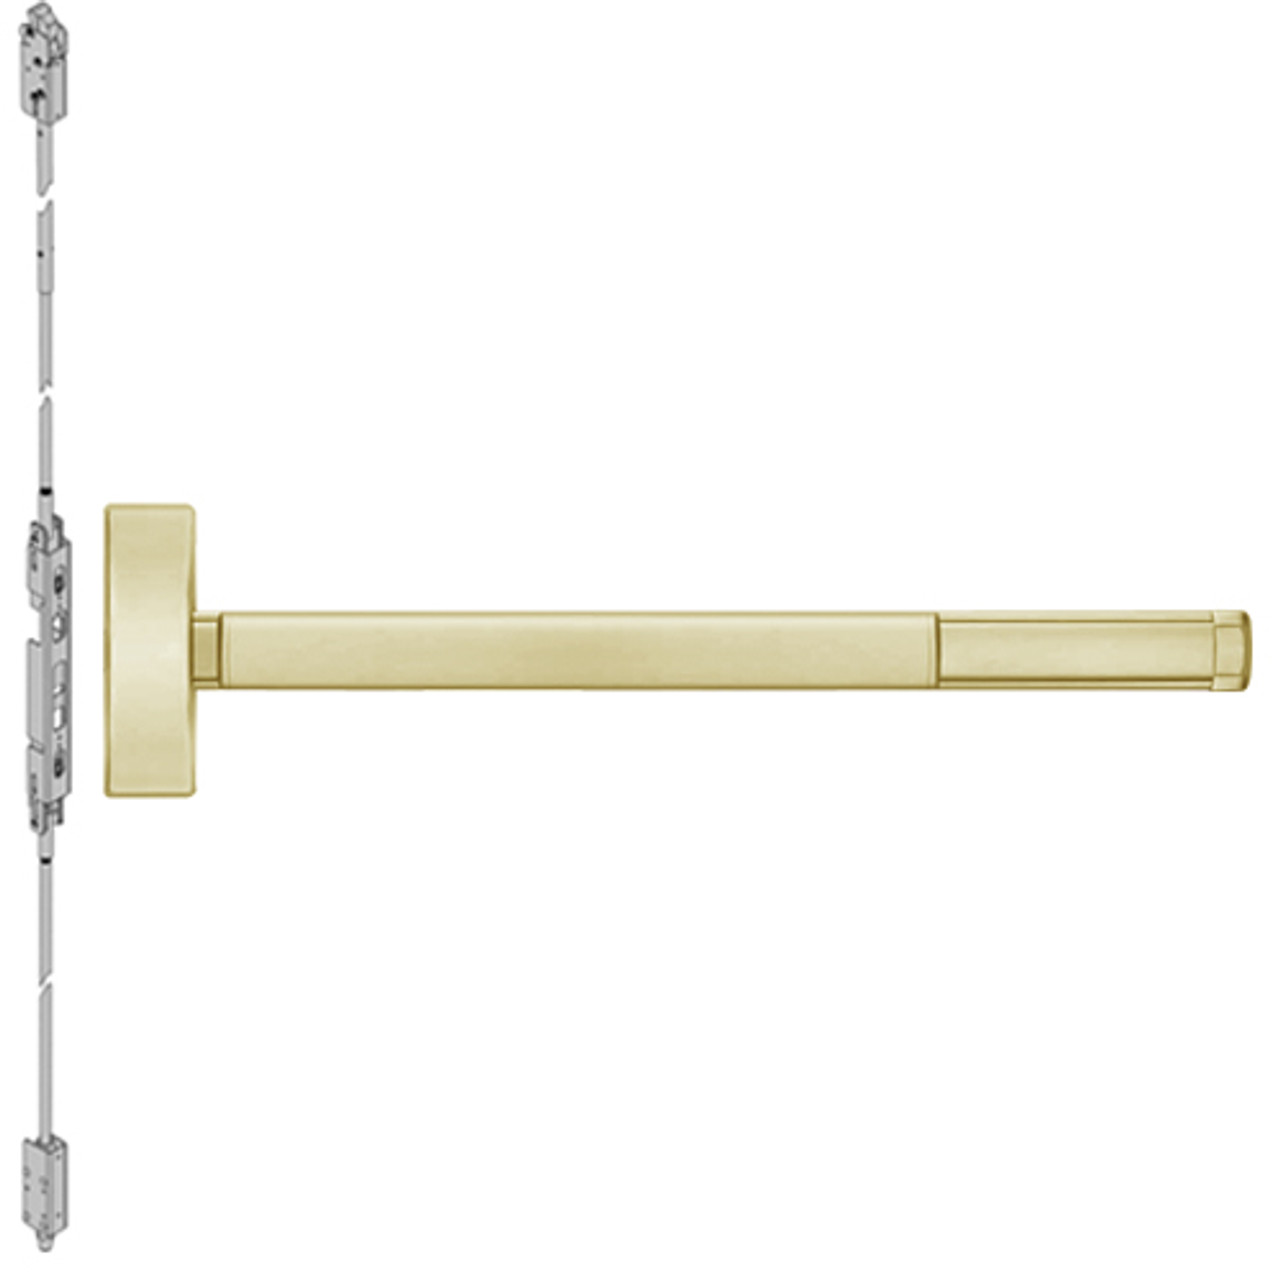 ELR2814-606-48 PHI 2800 Series Concealed Vertical Rod Exit Device with Electric Latch Retraction Prepped for Lever-Knob Always Active in Satin Brass Finish